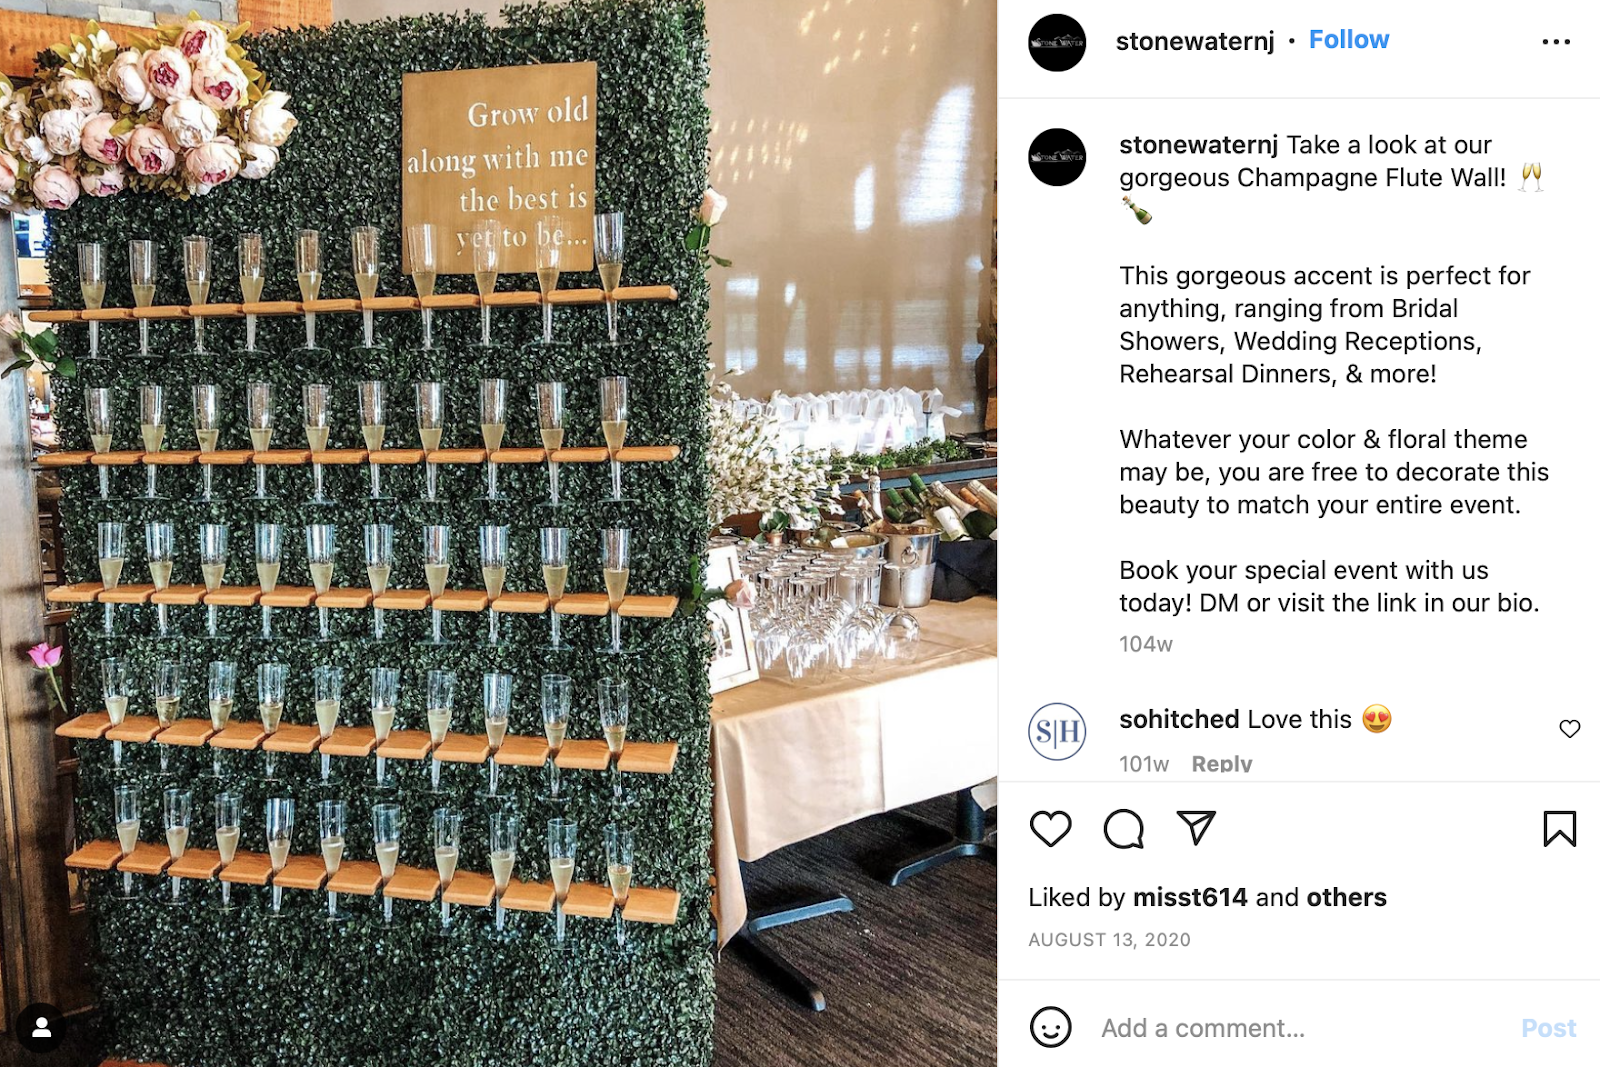 photo of champagne flute wall